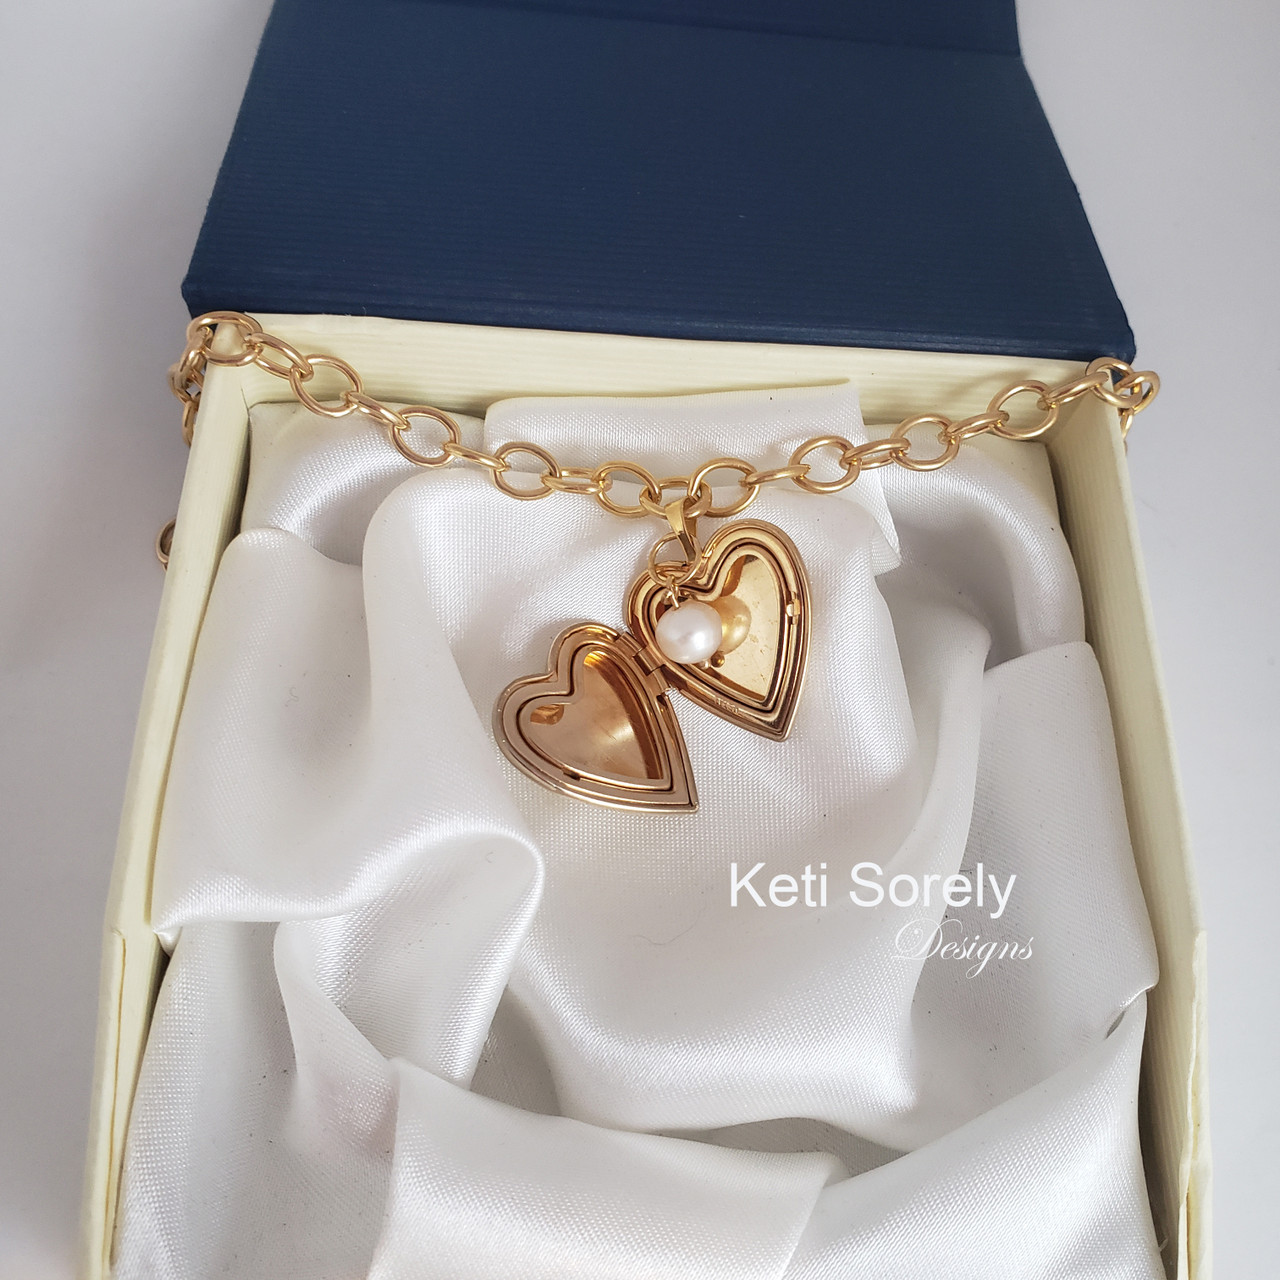 Hand Engraved Bracelet or Anklet with Rectangle Monogram Charm & Double  Chain - Choose Metal - Keti Sorely Designs